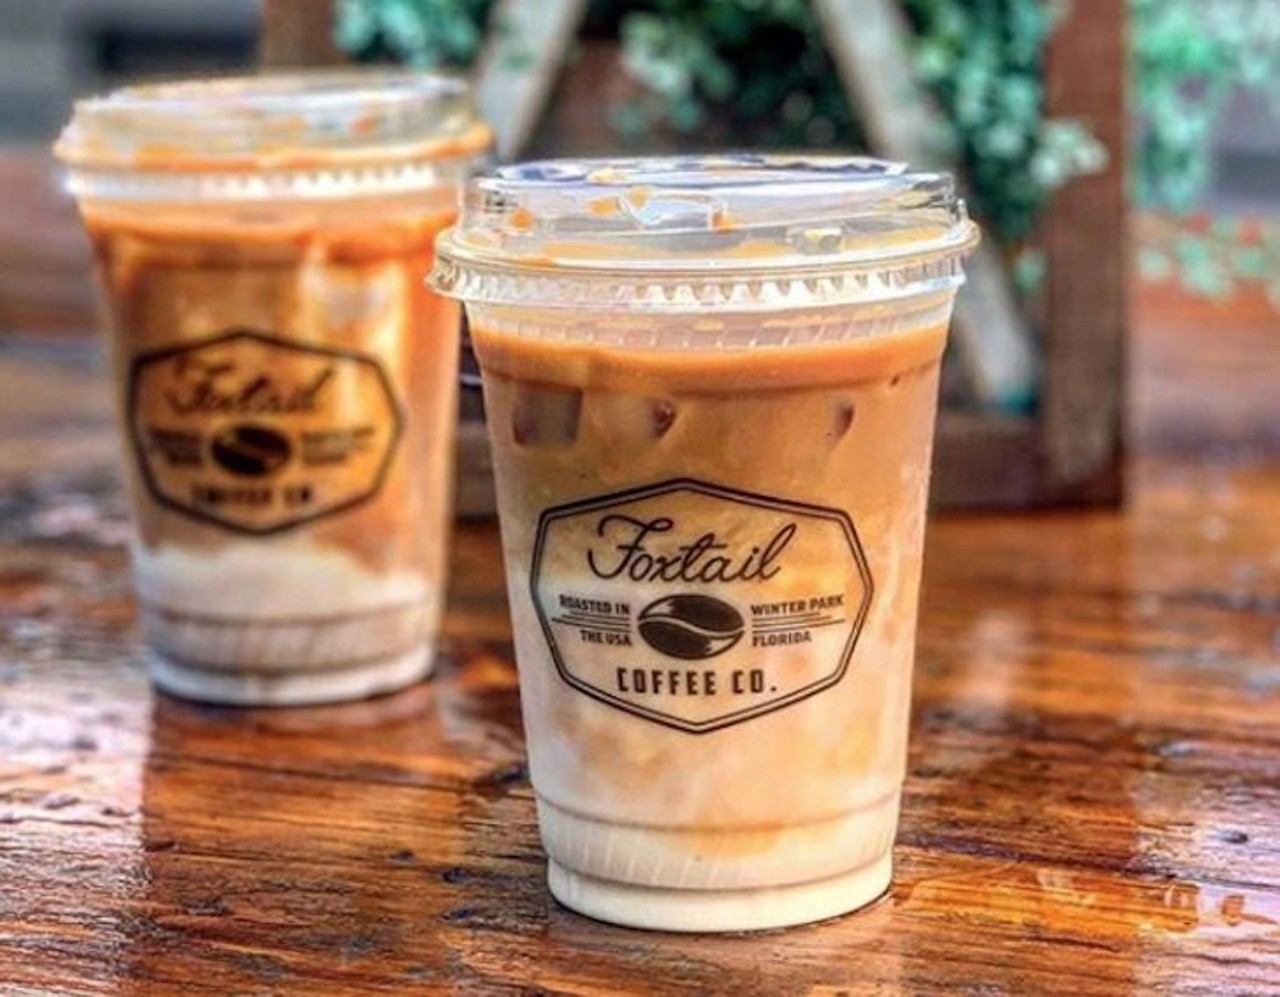 Foxtail Iced Coffee
Multiple Locations 
Founded only two short years ago, Foxtail Coffee Co. has already made quite an impact across Central Florida, with ten locations and counting. For a quick refresher and pick me up try the original Foxtail nitro cold brew or the vanilla caramel nitro cold brew.
Photo via Instagram/Foxtail Coffee Co.